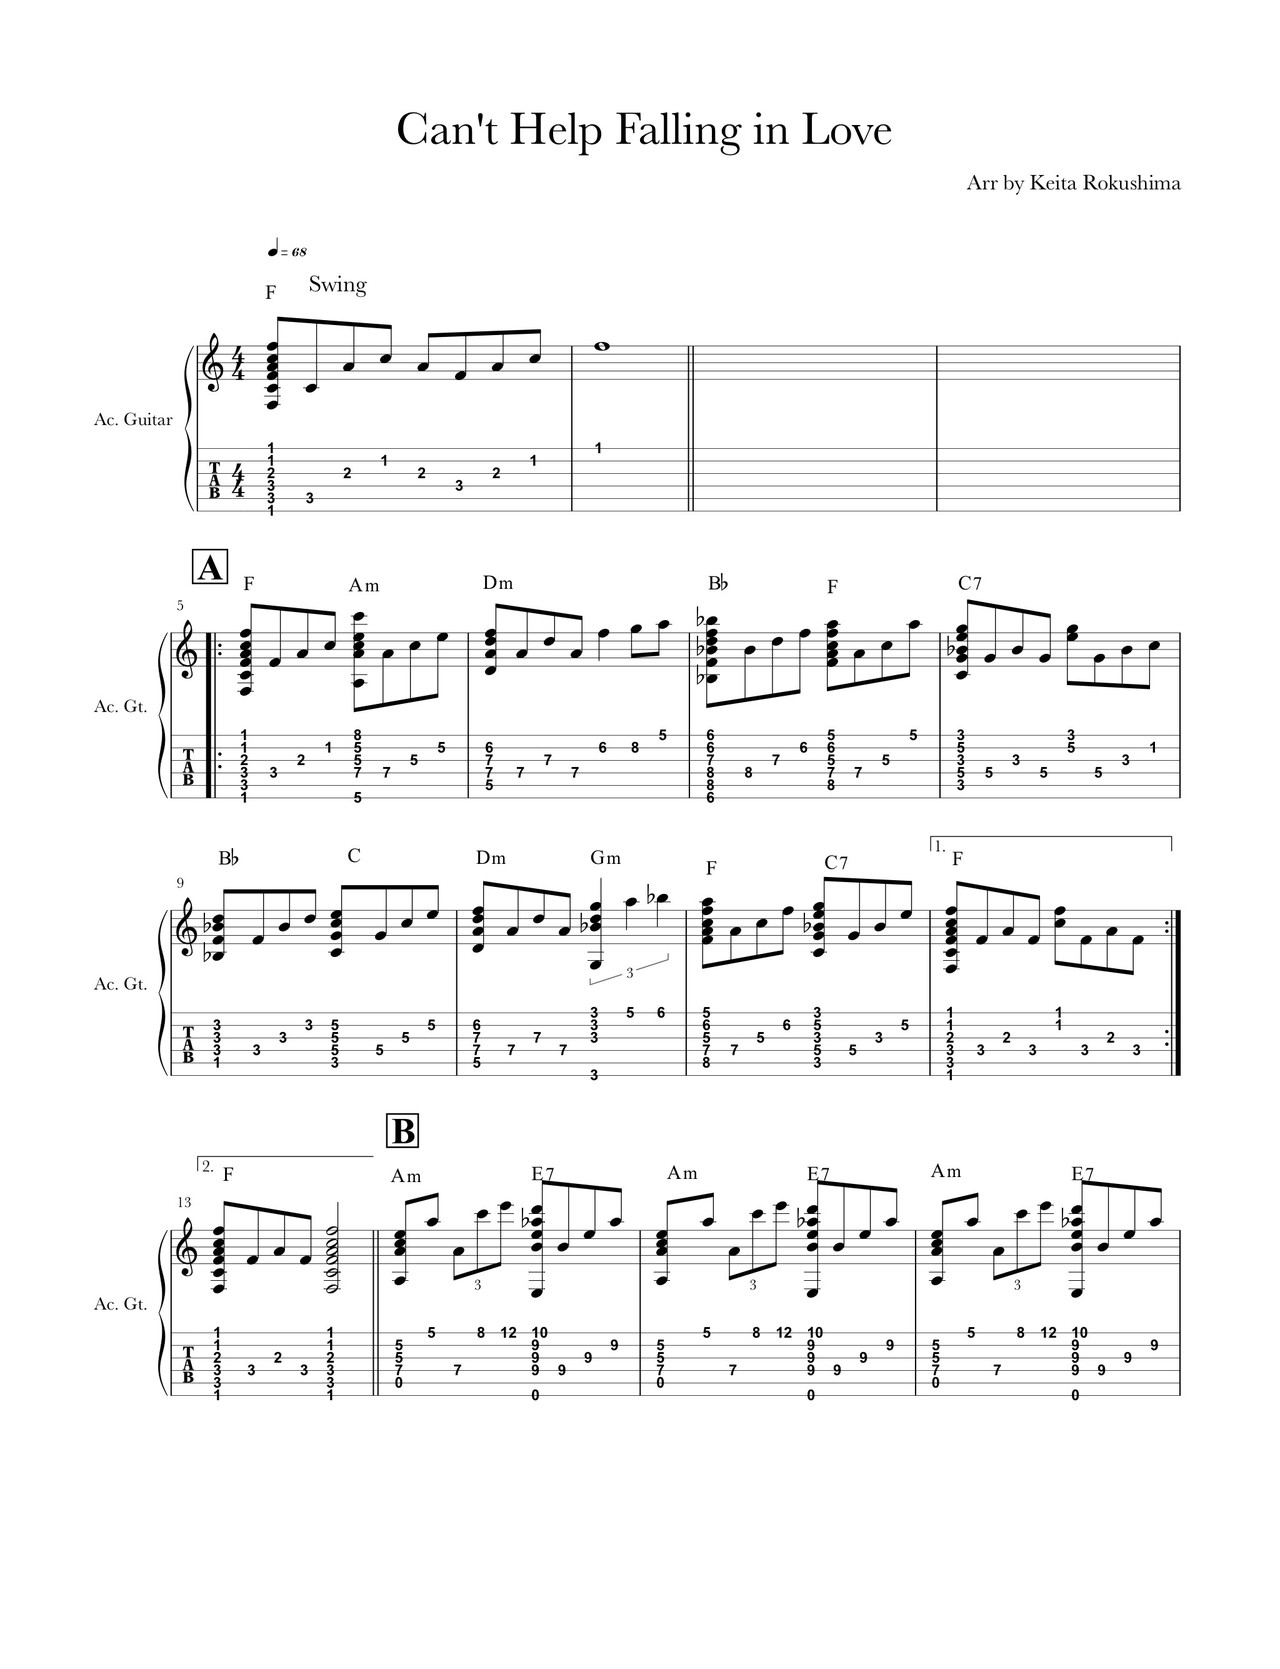 Can't Help Falling In Love ukulele chords from Maybe